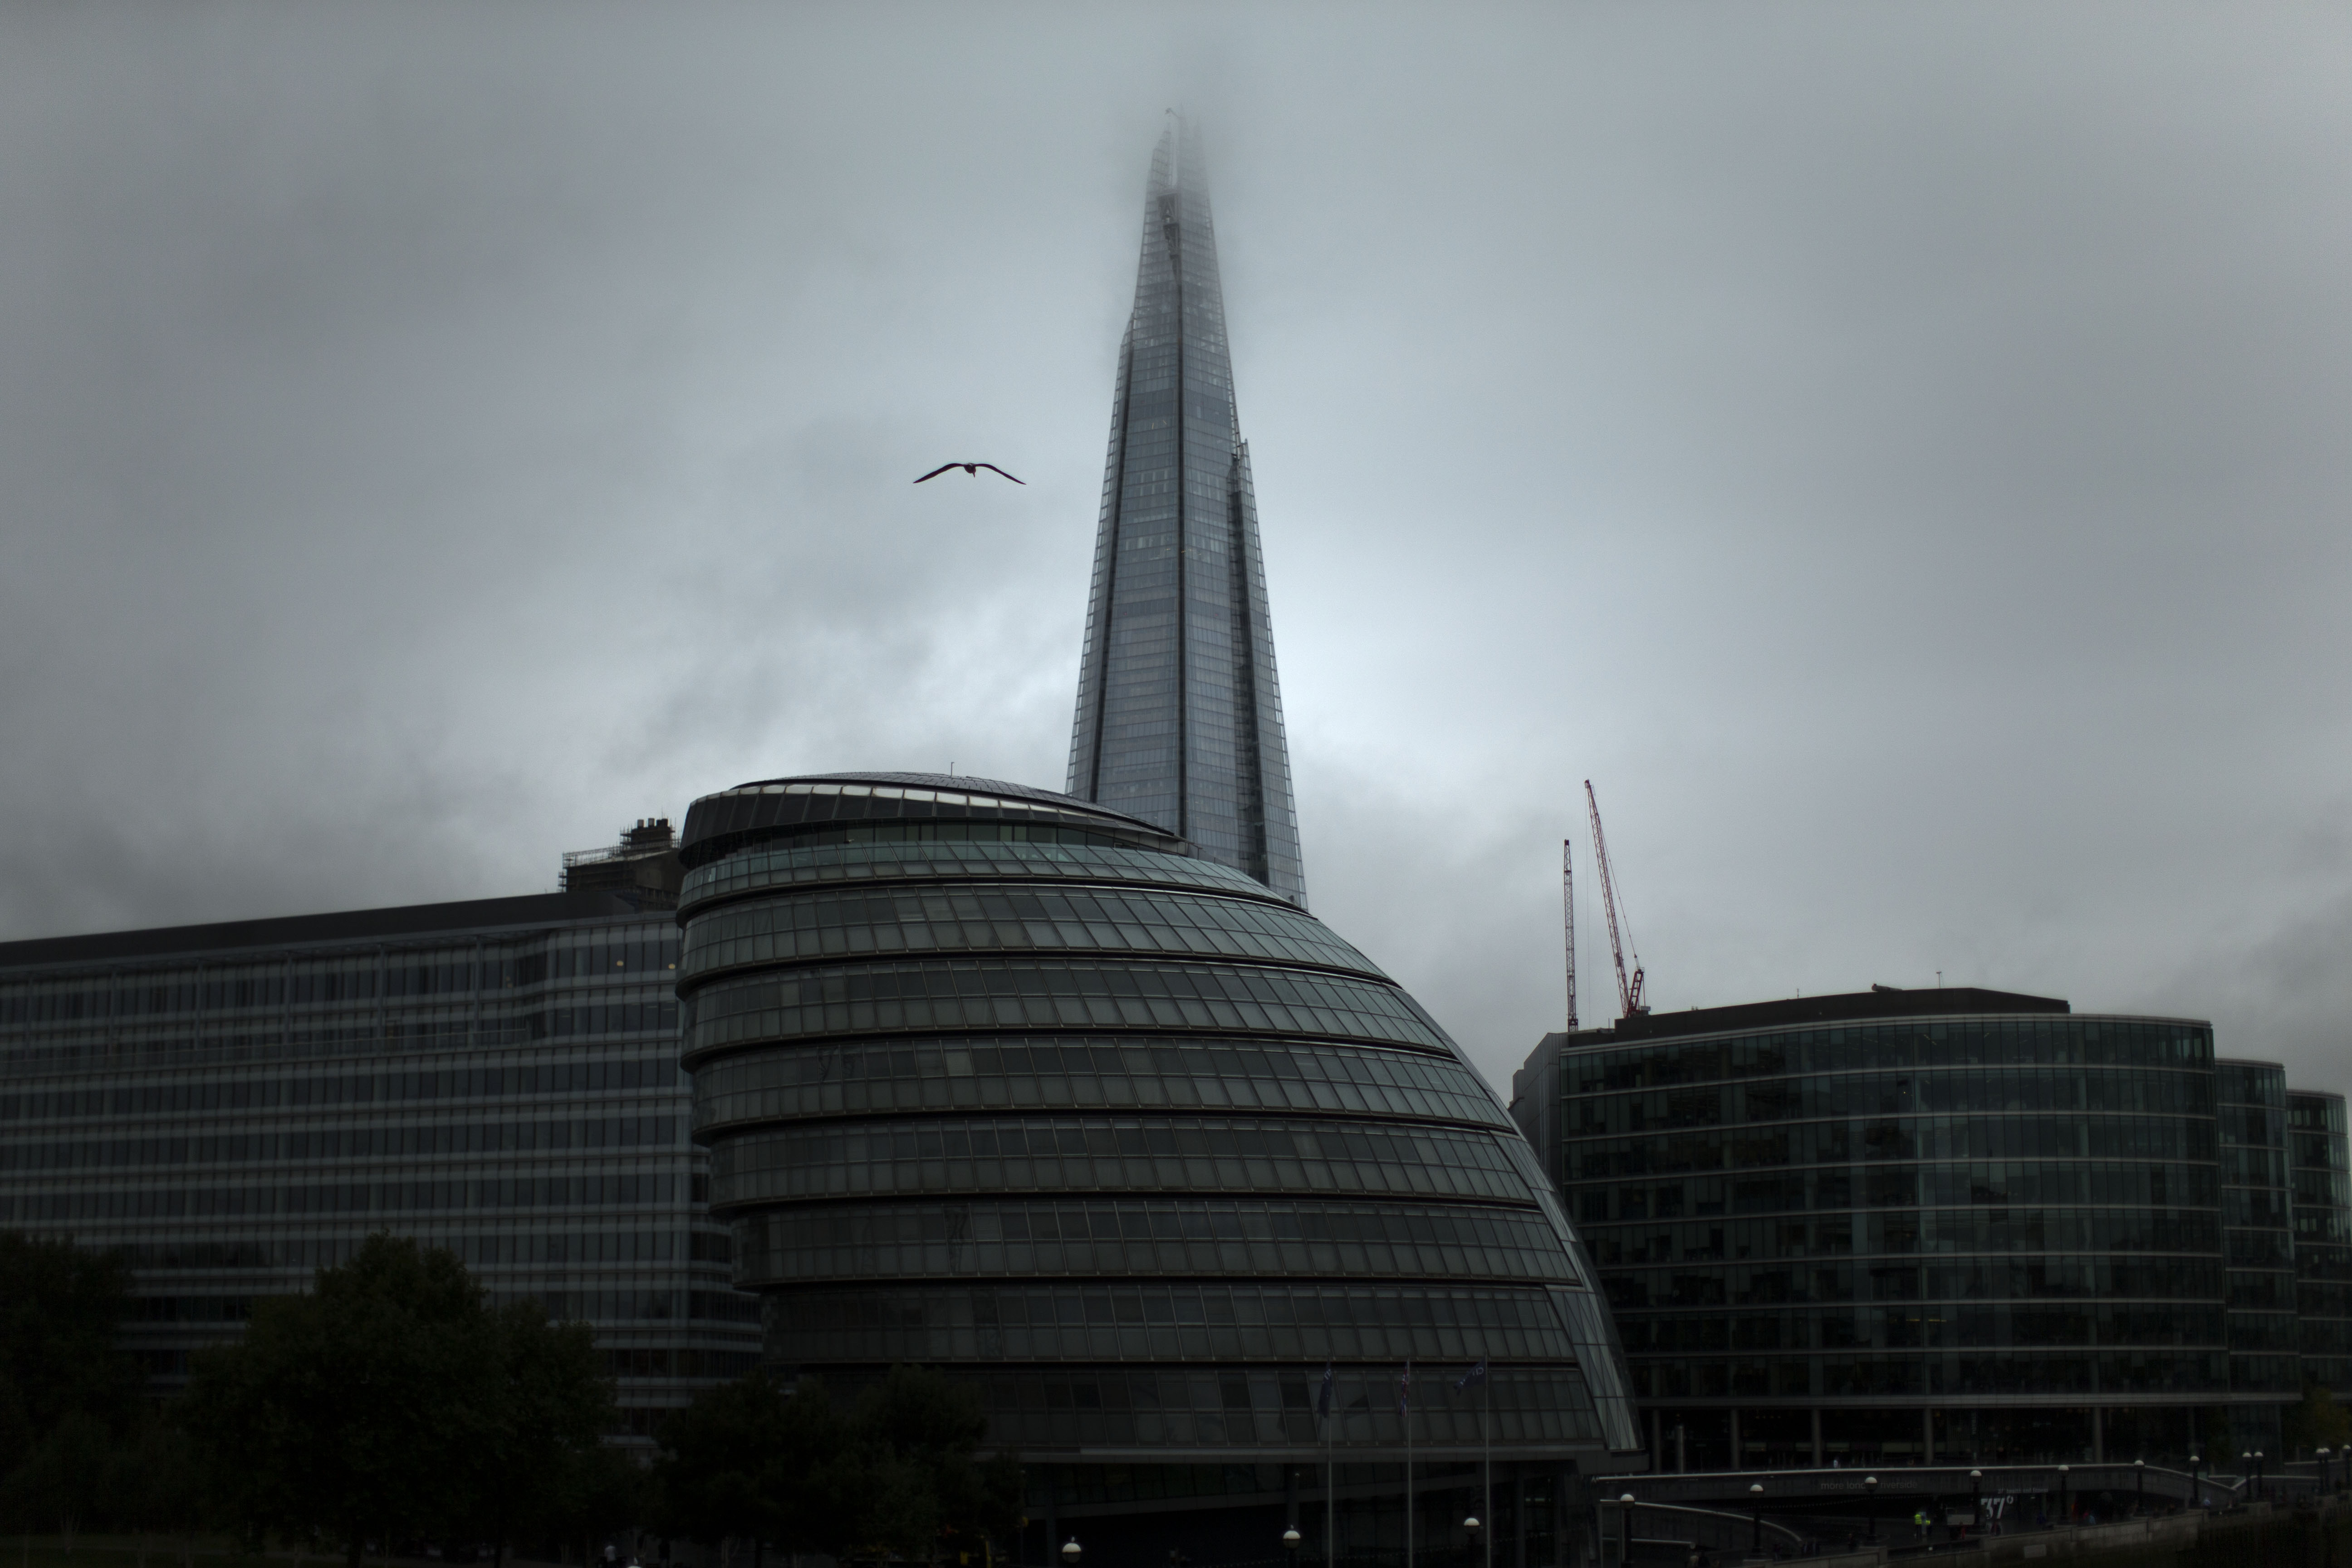 Clouds cover the top of the Shard skyscraper on a rainy day in London, Monday, Oct. 1, 2012.  The Shard was officially opened in July and stands at 310 meters (1,016 ft) high, making it the tallest building in western Europe.  (AP Photo/Matt Dunham)